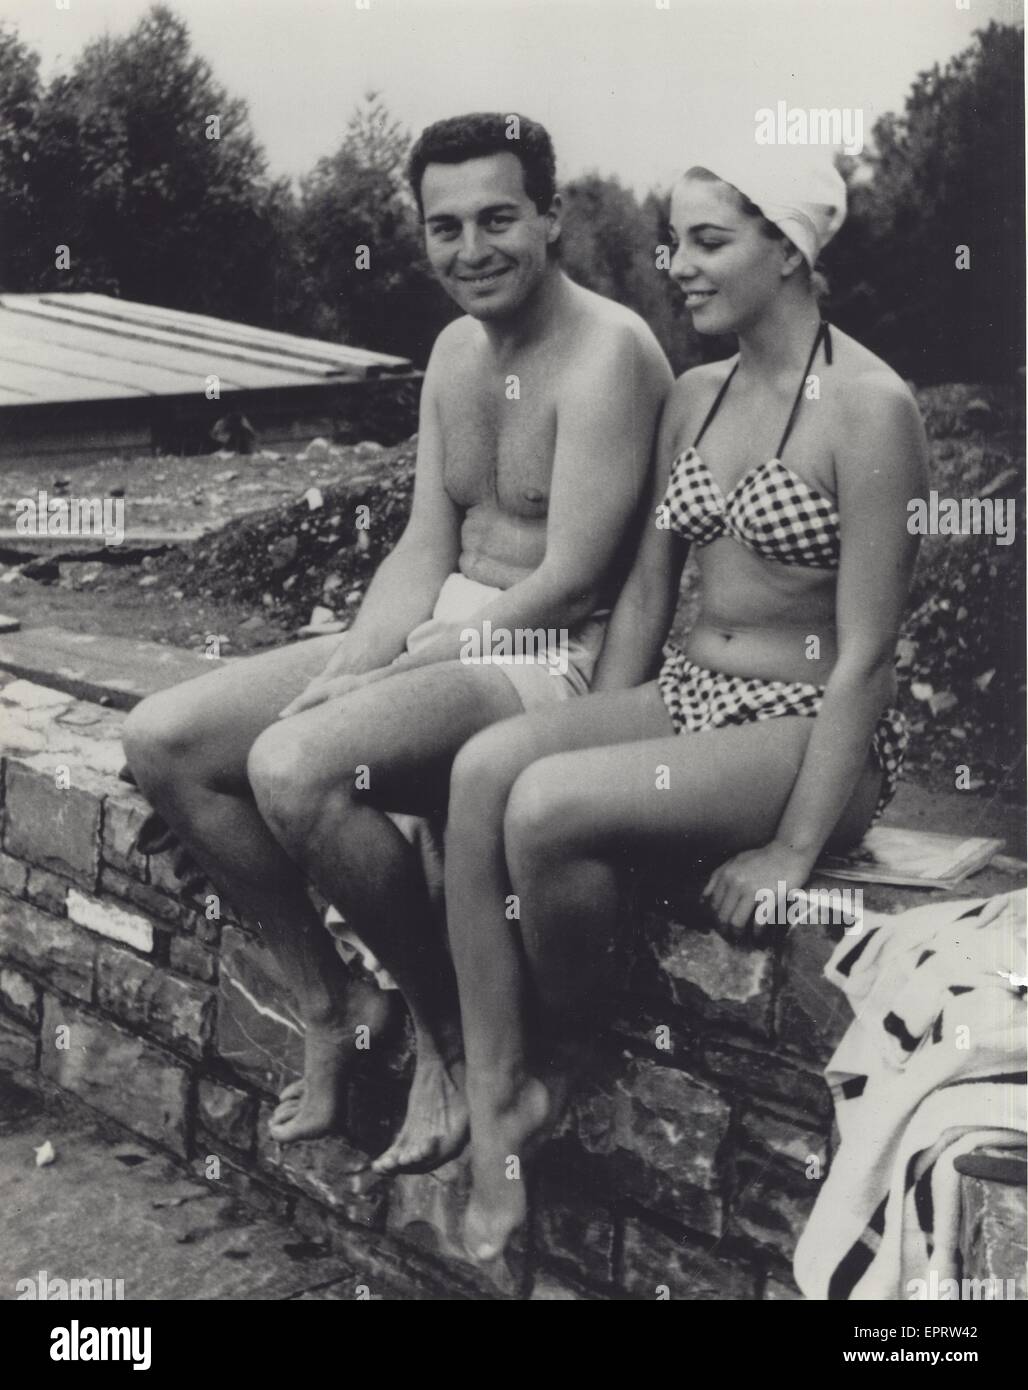 JOAN COLLINS with Sydney Chaplin, son of Charlie Chaplin at his father's  residence near Vevey in